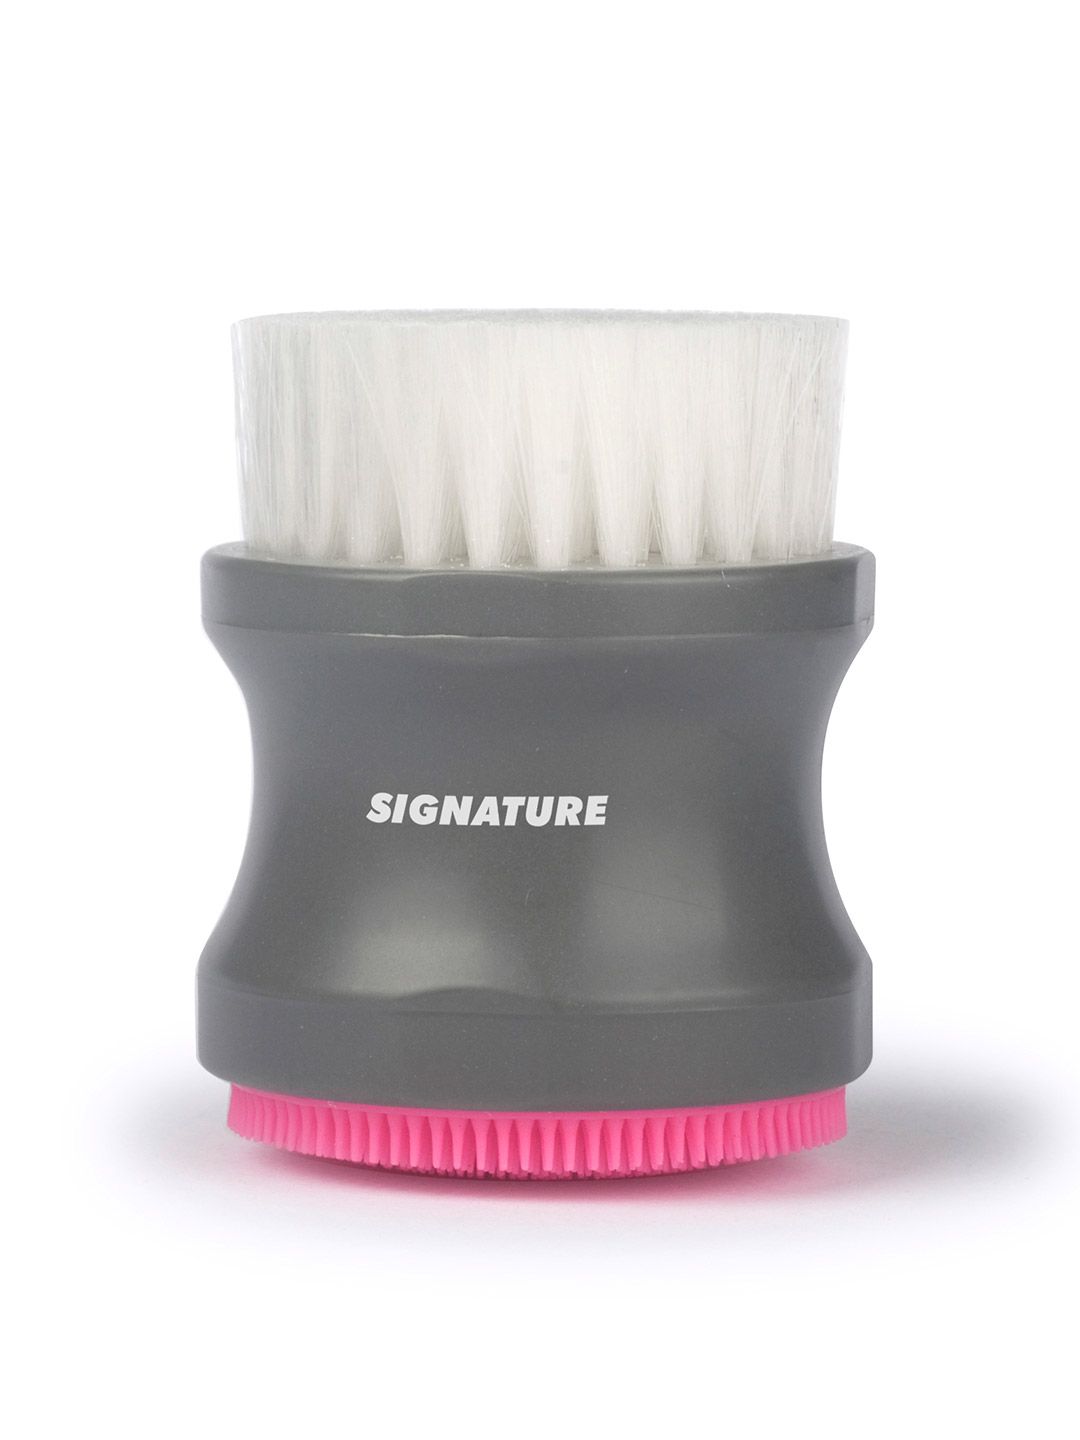 Basicare Signature Compact Duo Facial Cleansing Brush Price in India